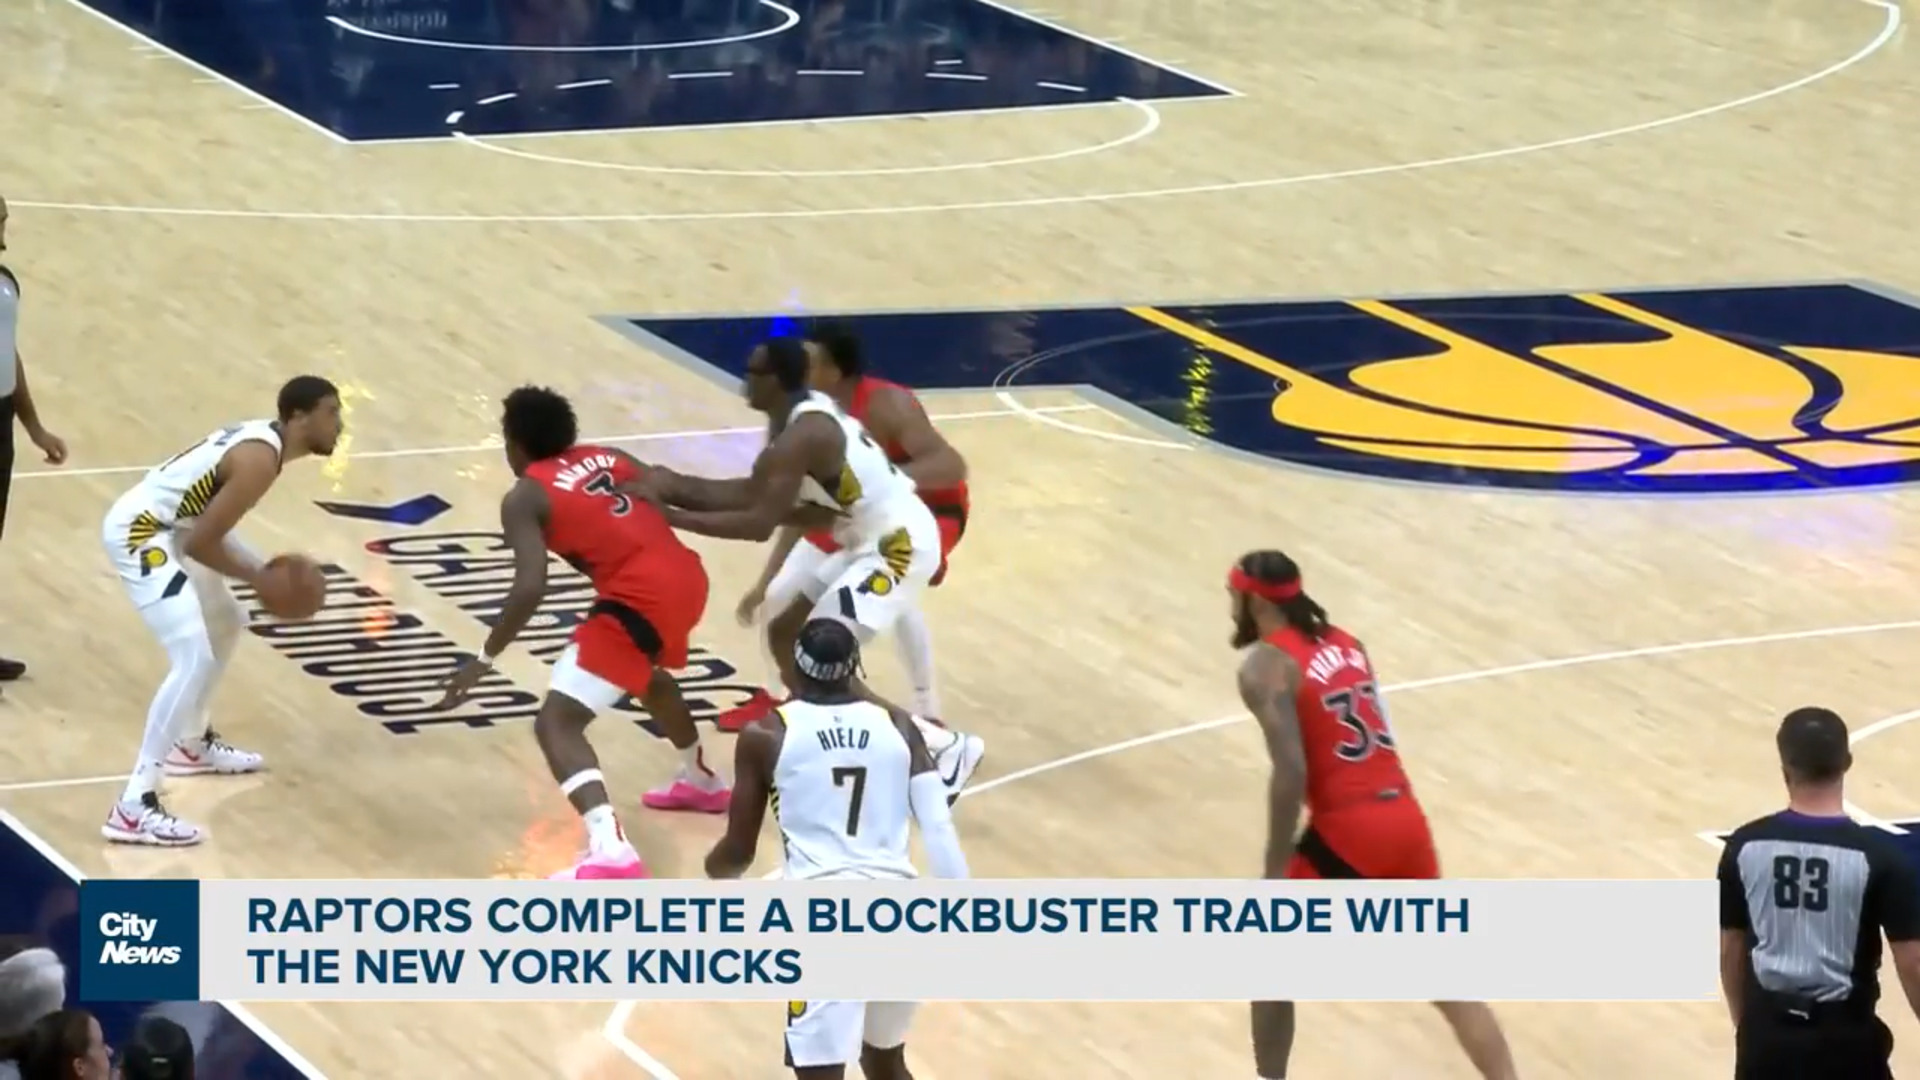 Raptors complete a blockbuster trade with the New York Knicks